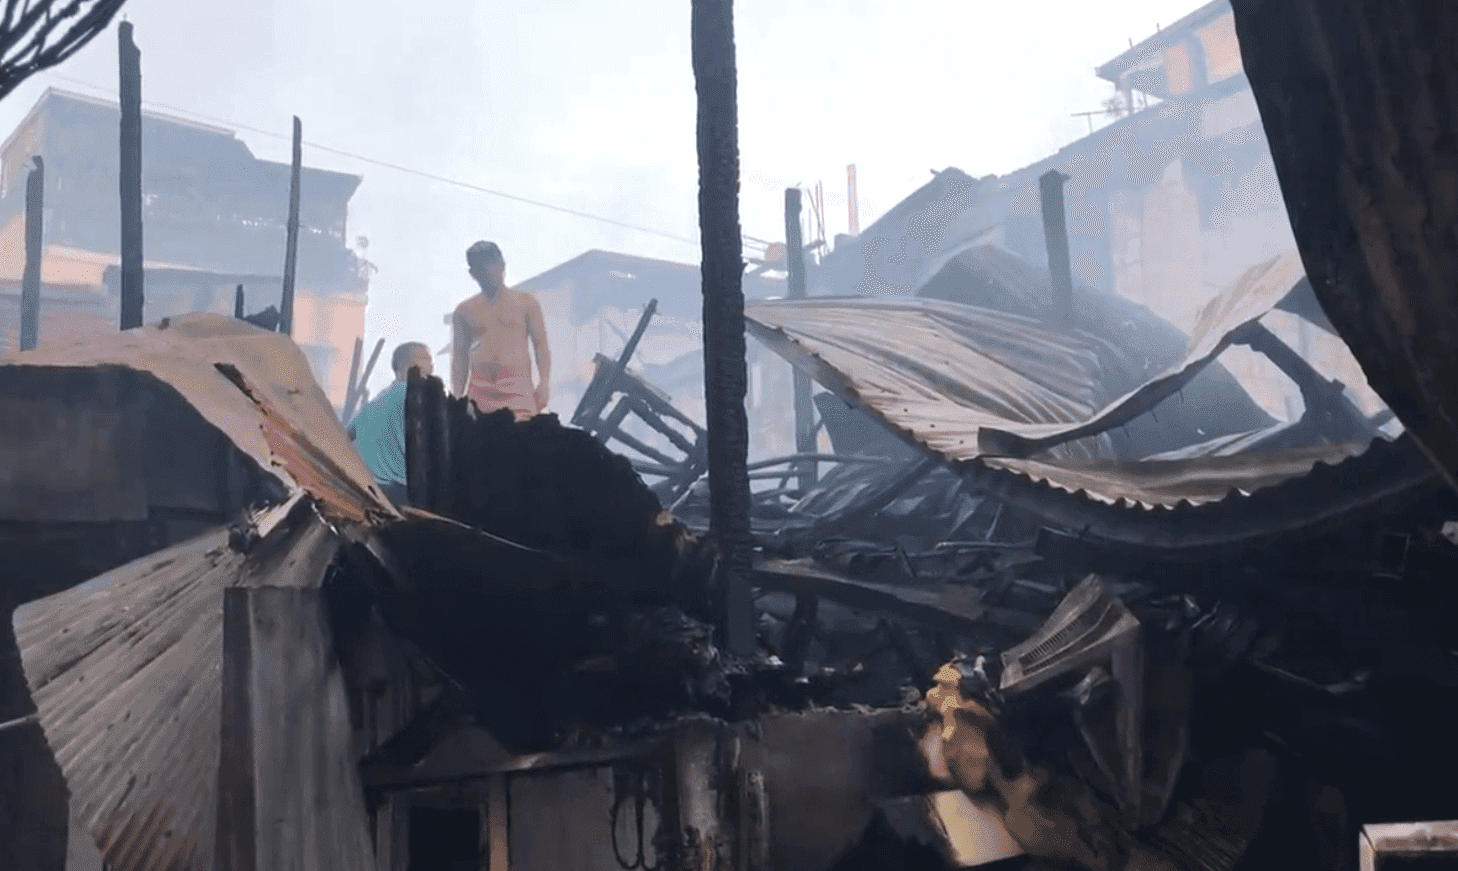 2 minors killed after a fire blaze residential area in Mandaluyong City